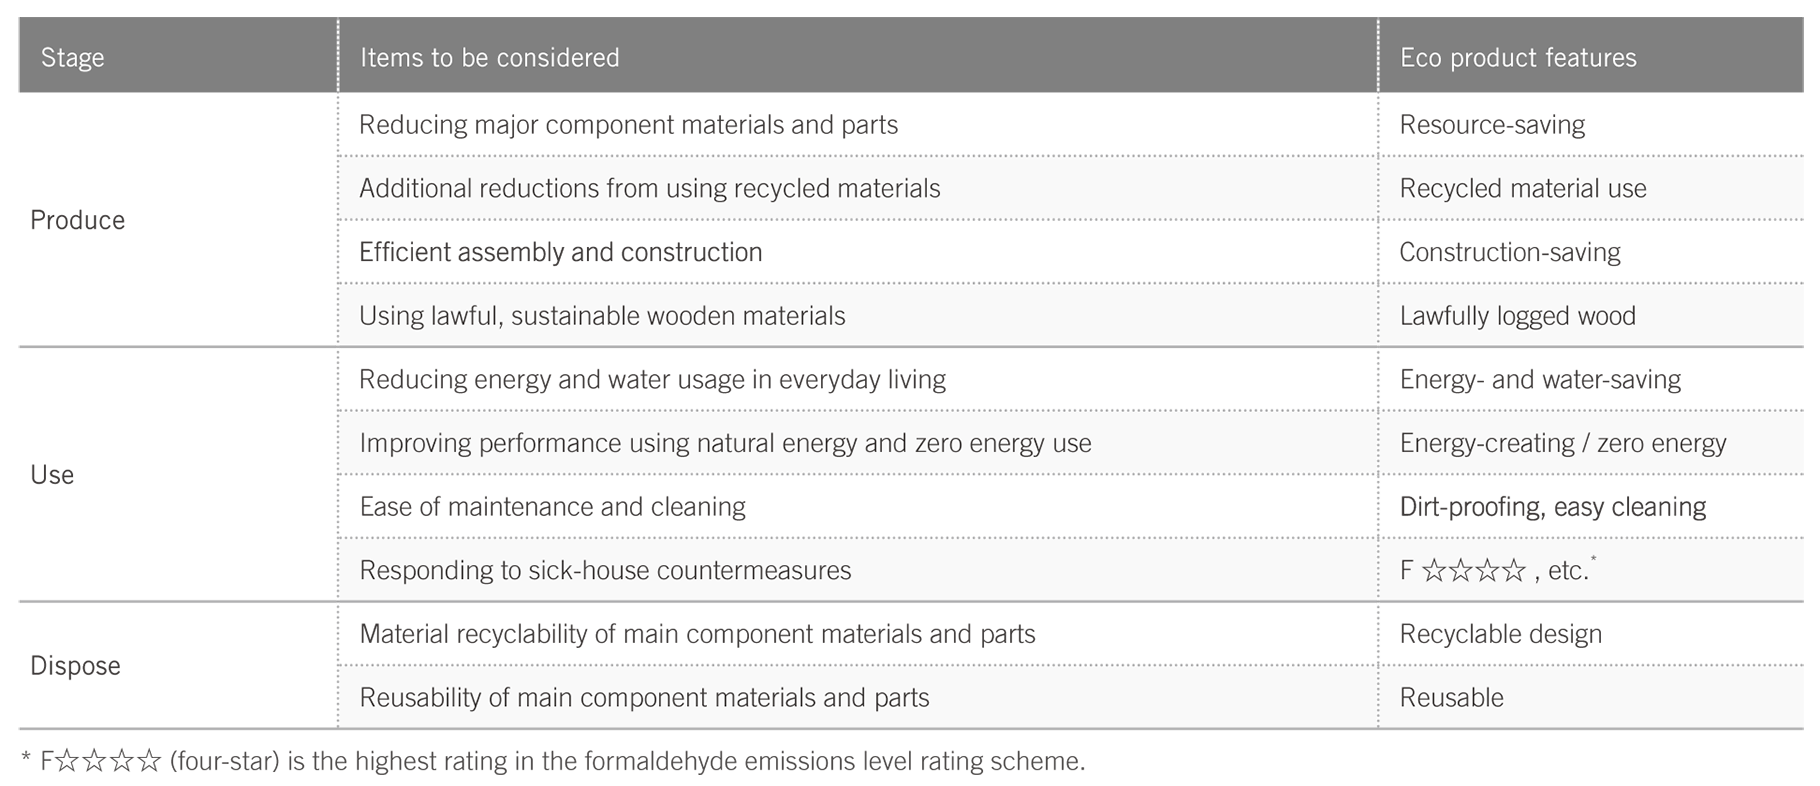 Evaluation Criteria for Product-Related Environmental Assessment